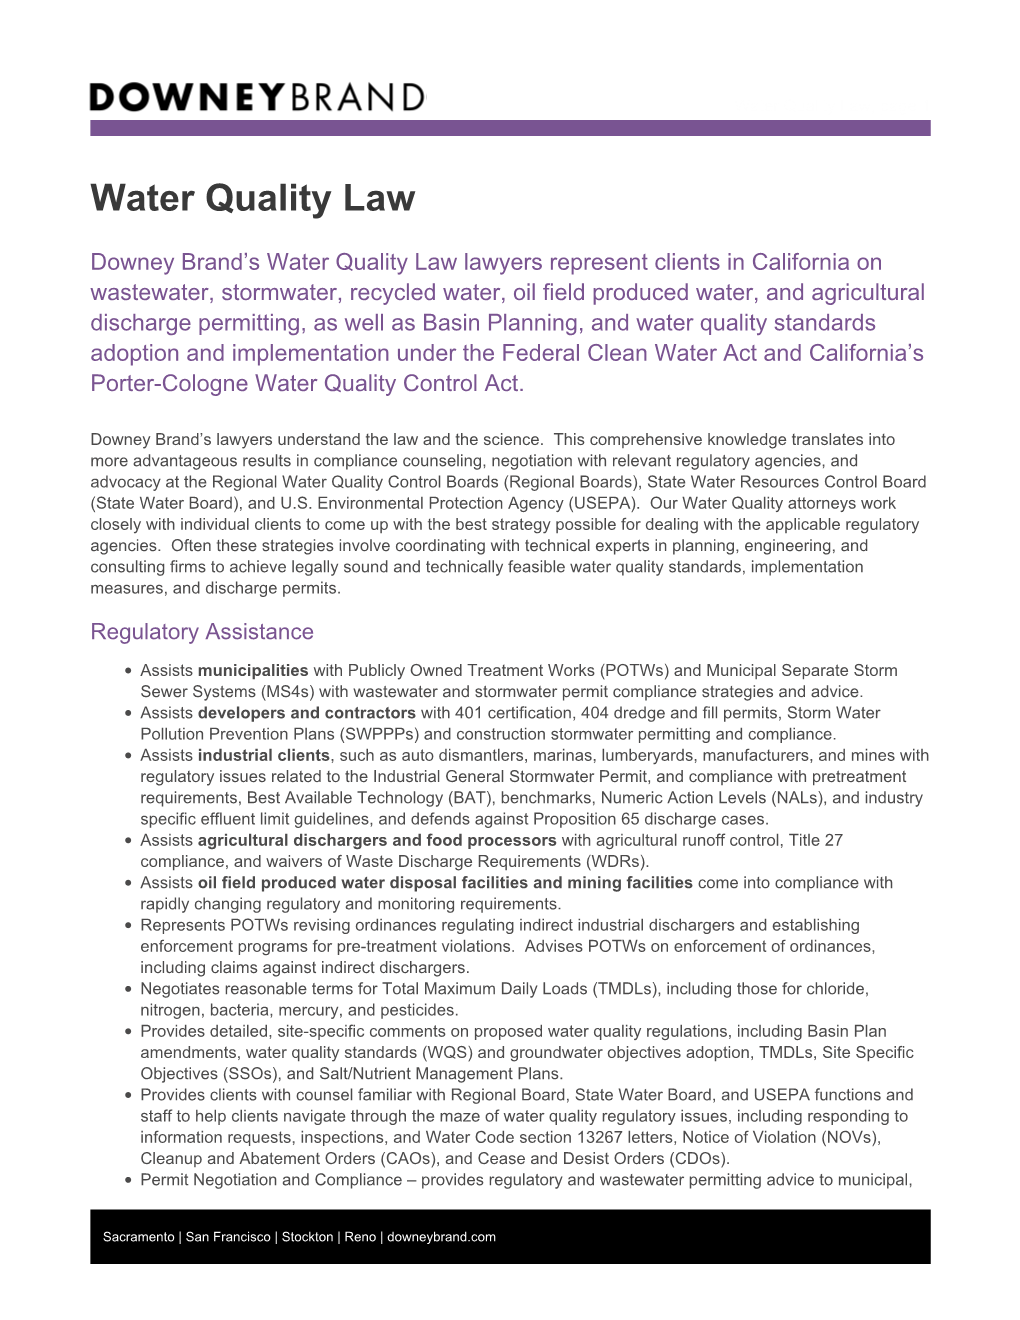 Water Quality Law, Page 1